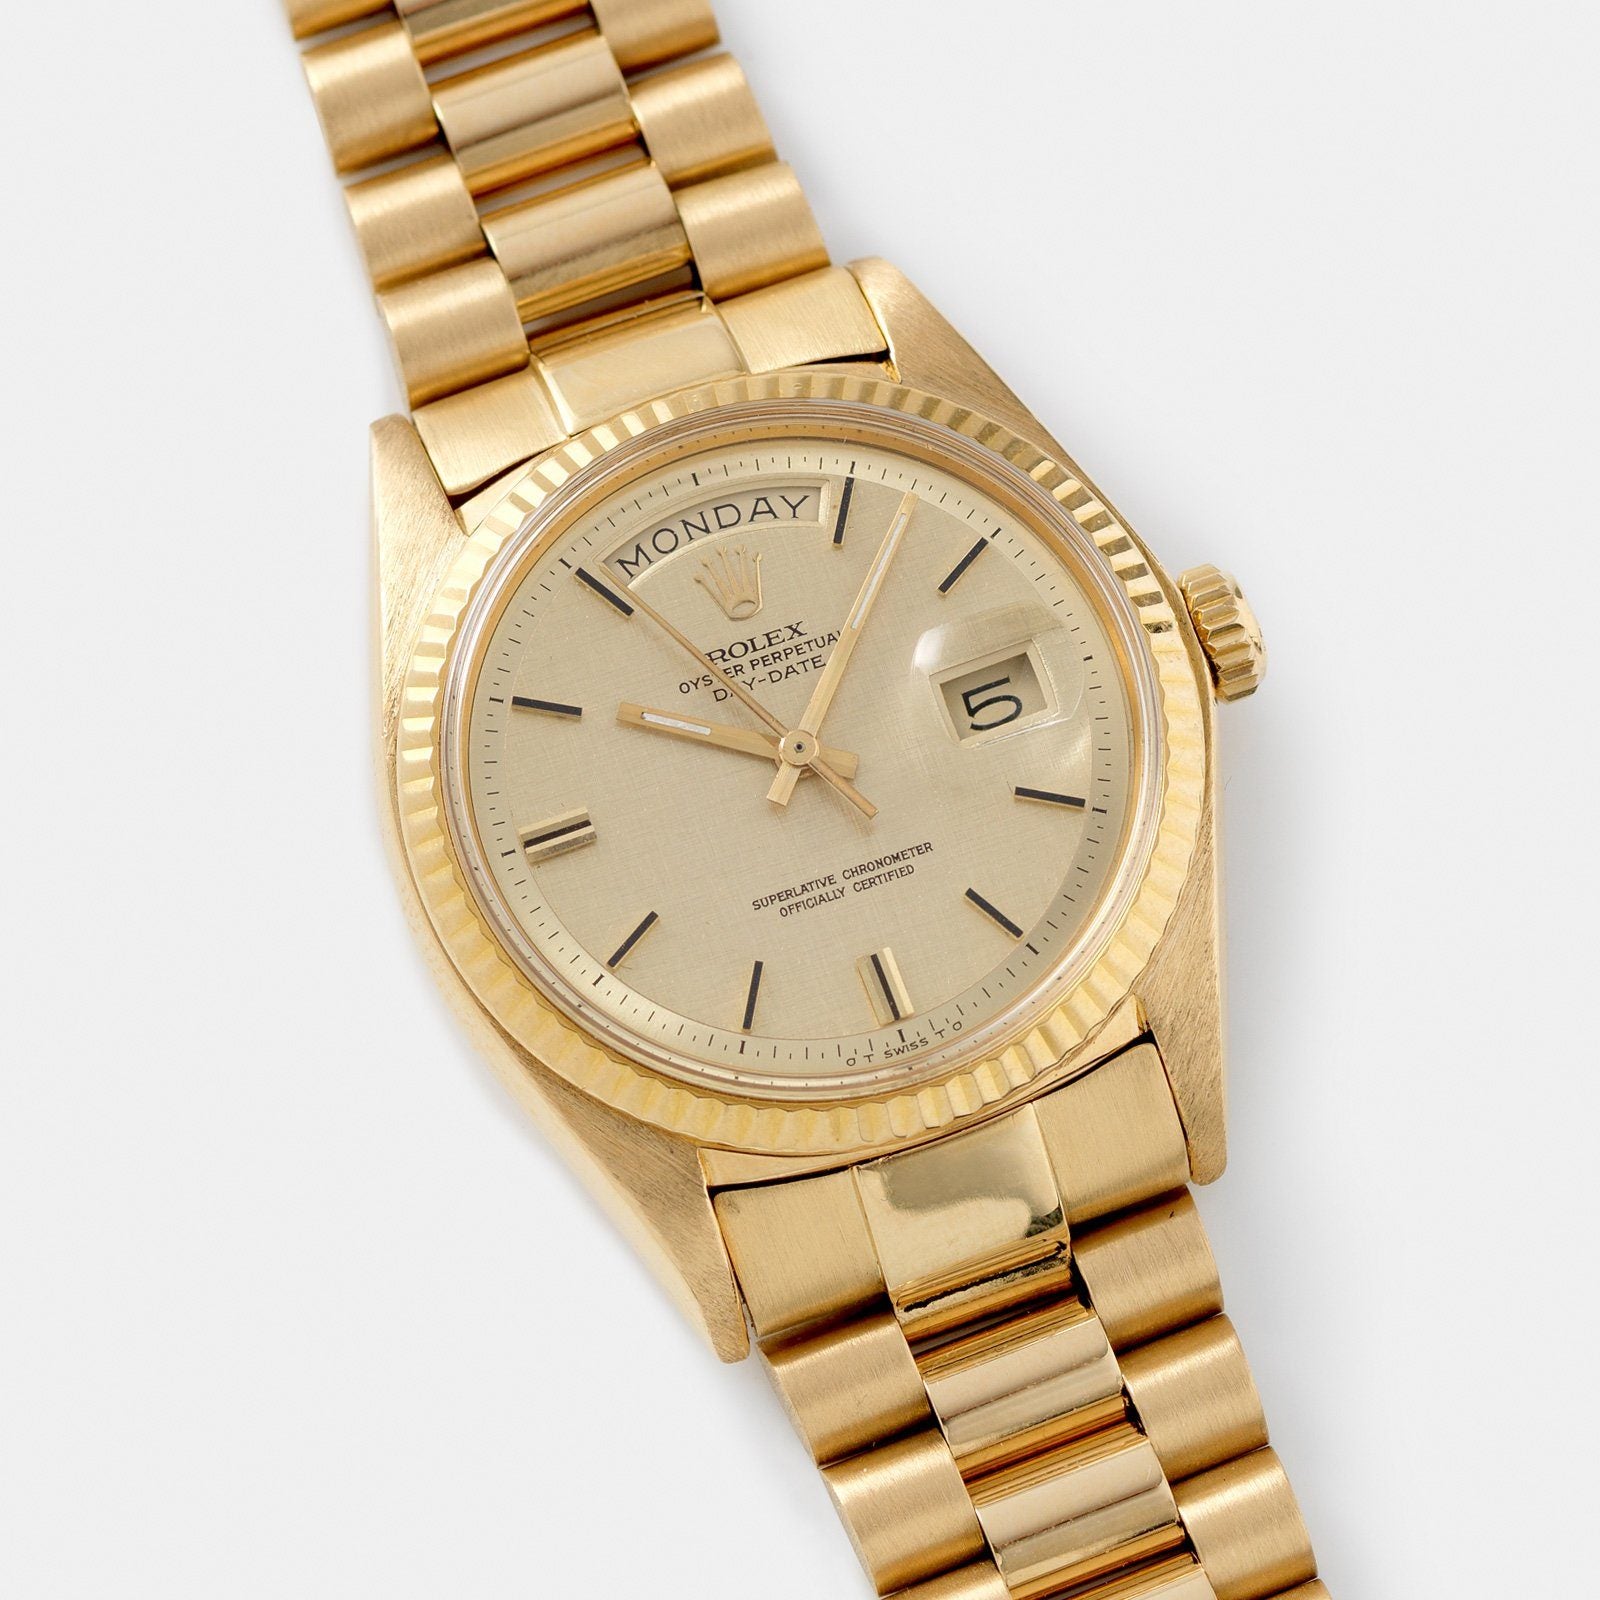 Rolex Day-Date in Yellow Gold ref 1803 Grey Dial 1971 on President